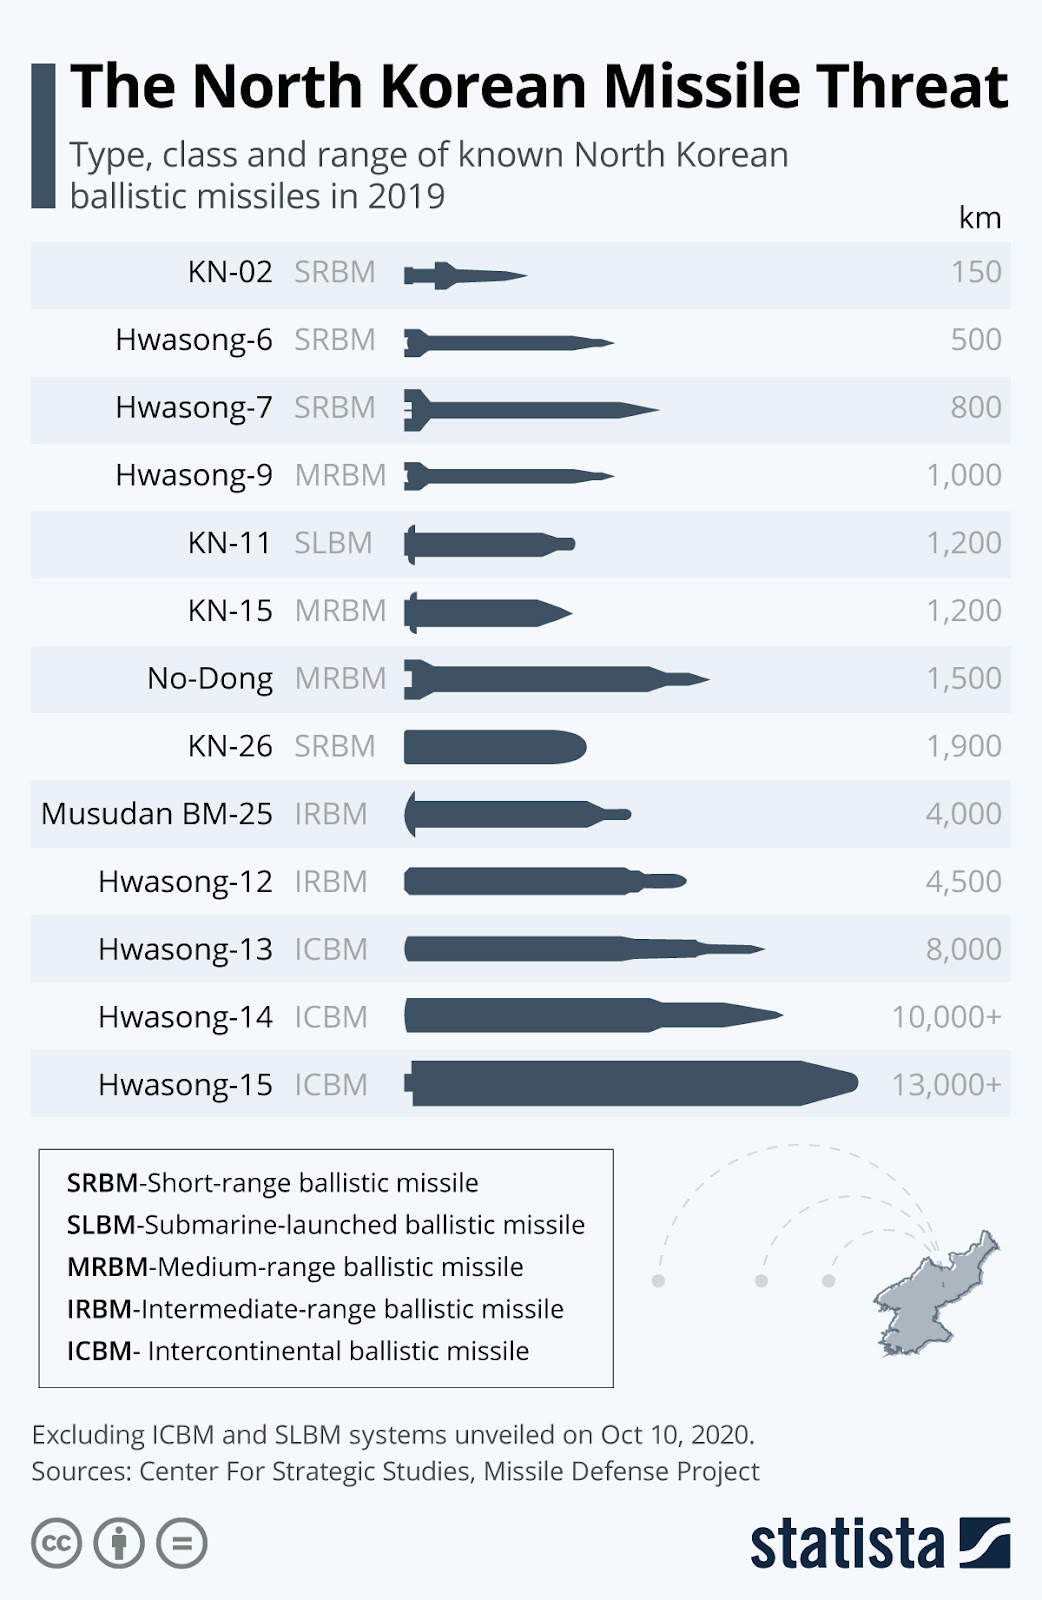 infographic from Statista on the types of missiles tested by North Korea